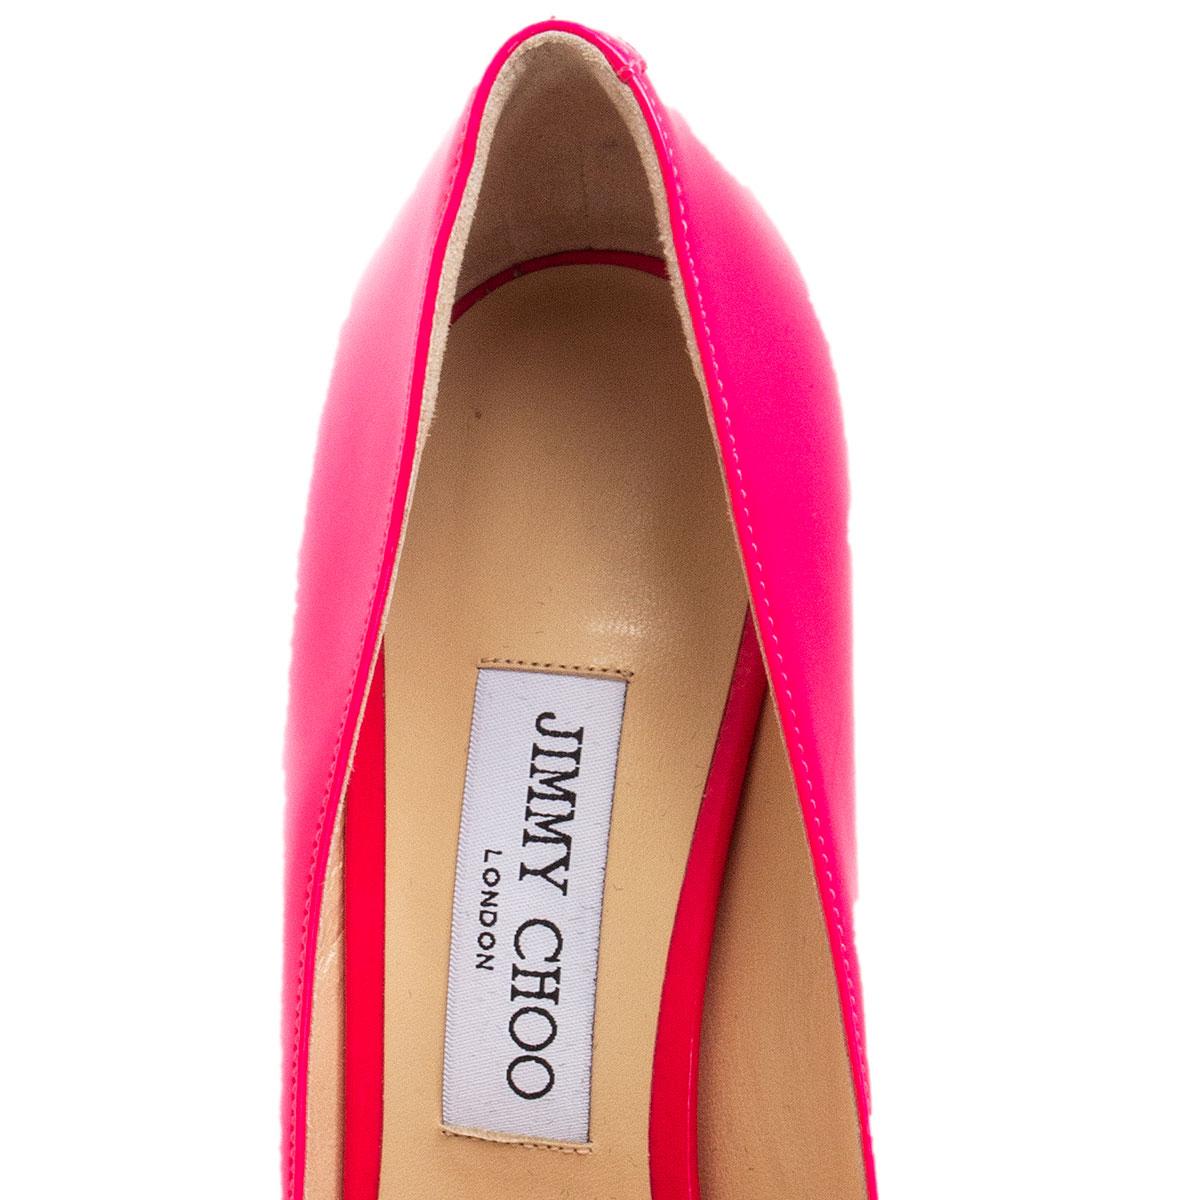 Pink JIMMY CHOO hot pink patent leather ROMY 85 POINTED-TOE Pumps Shoes 39.5 For Sale